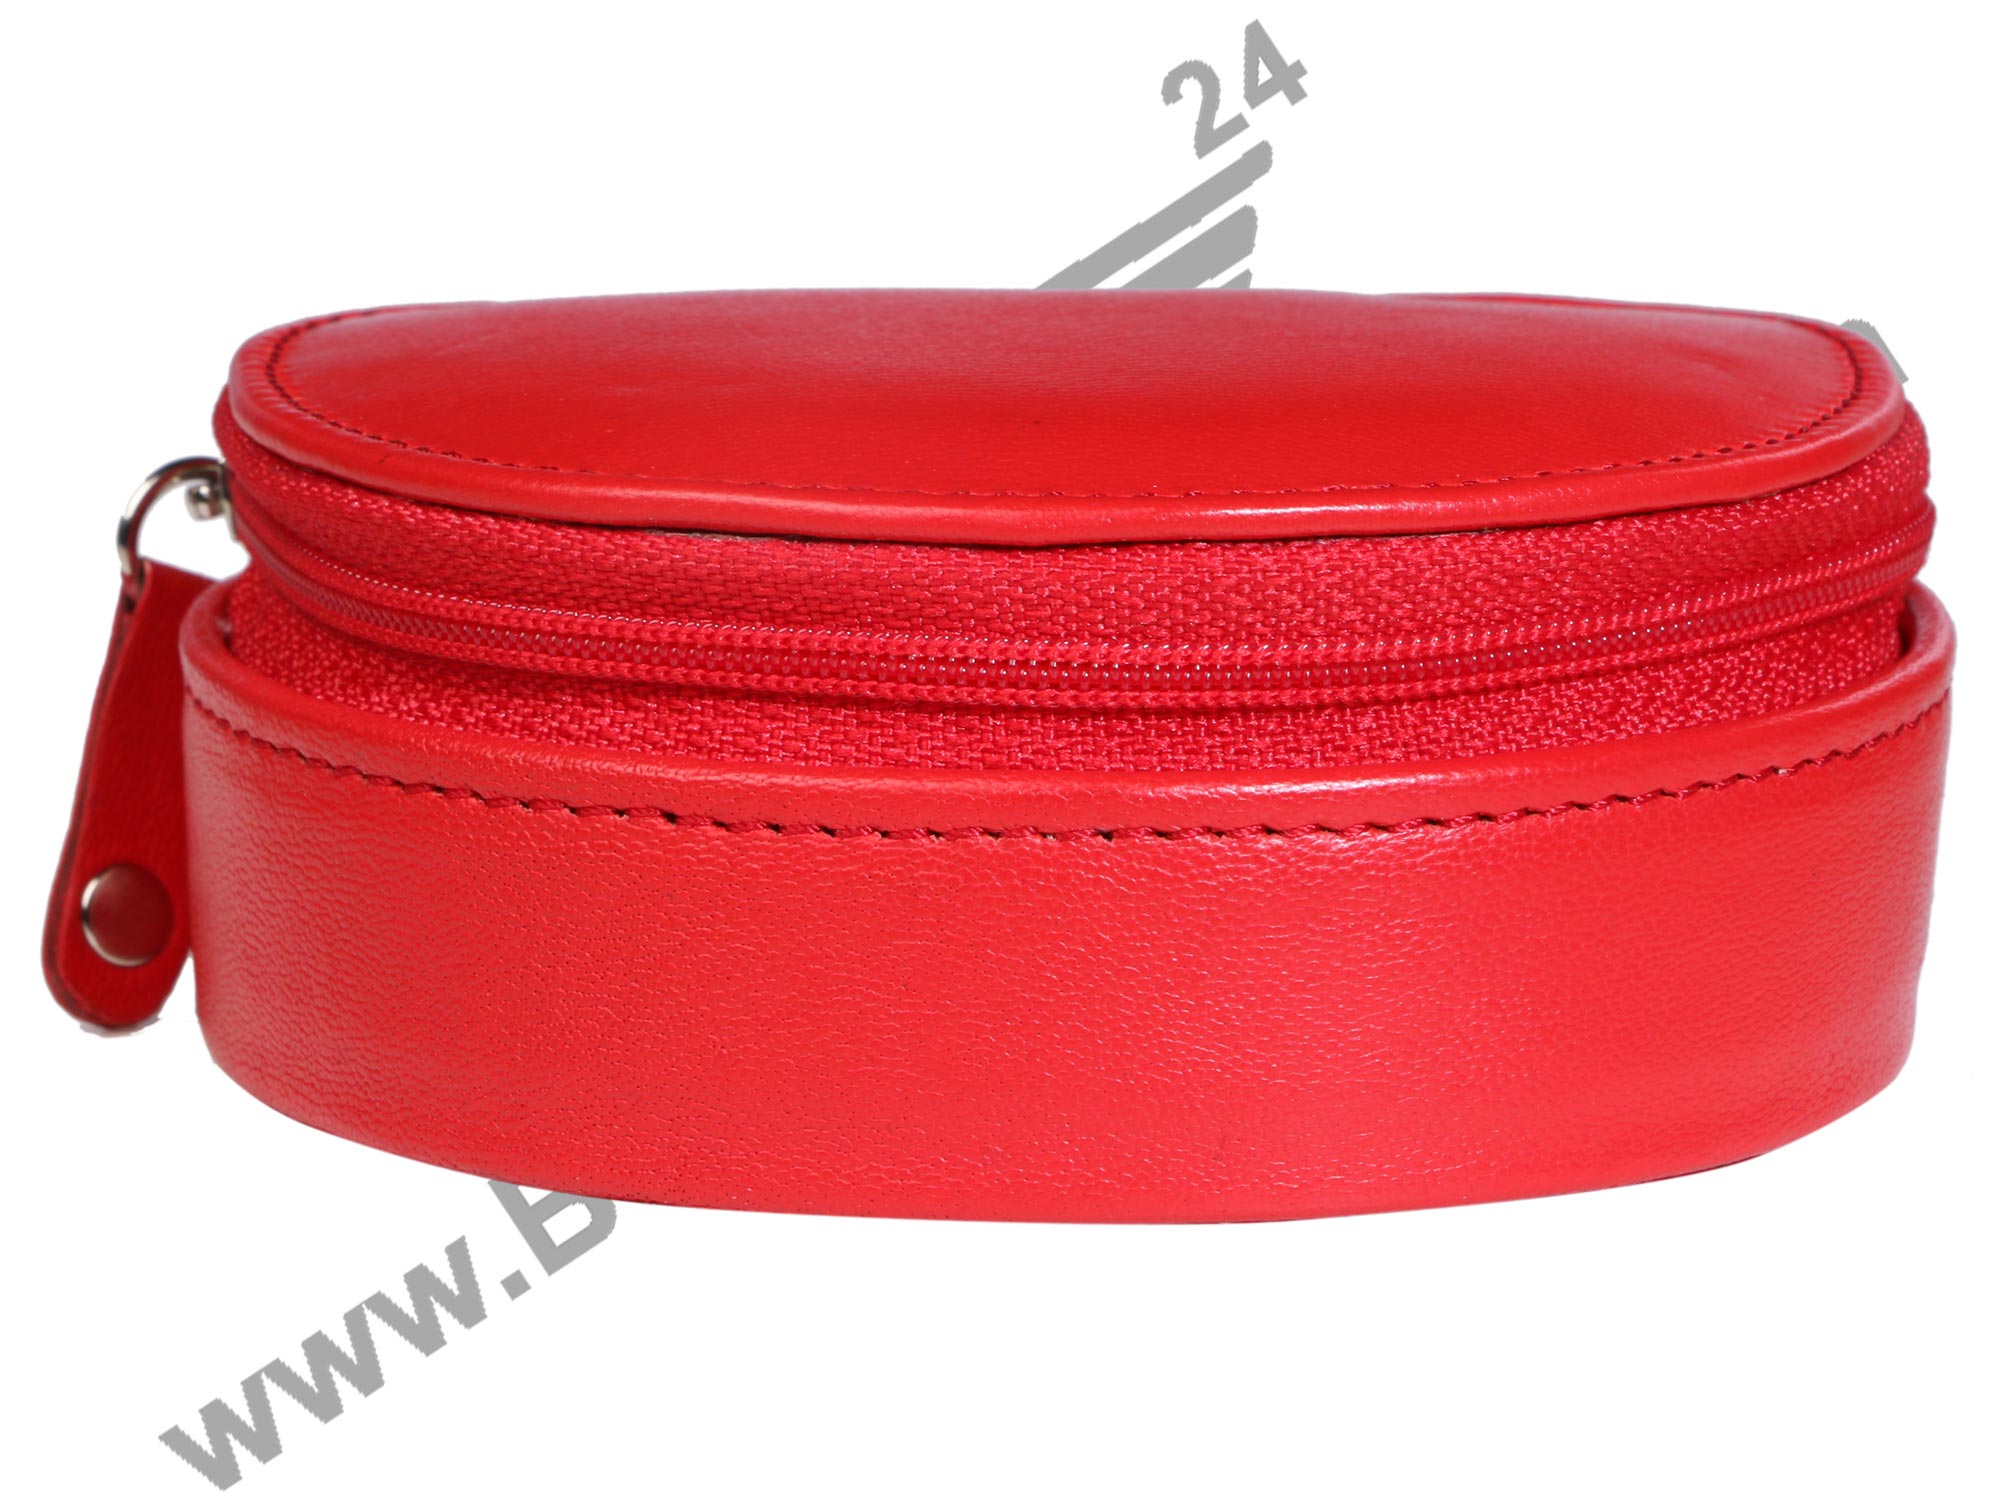 Front view of red TRAVEL SMALL JEWELERY CASE. It is rich red in color and zipped